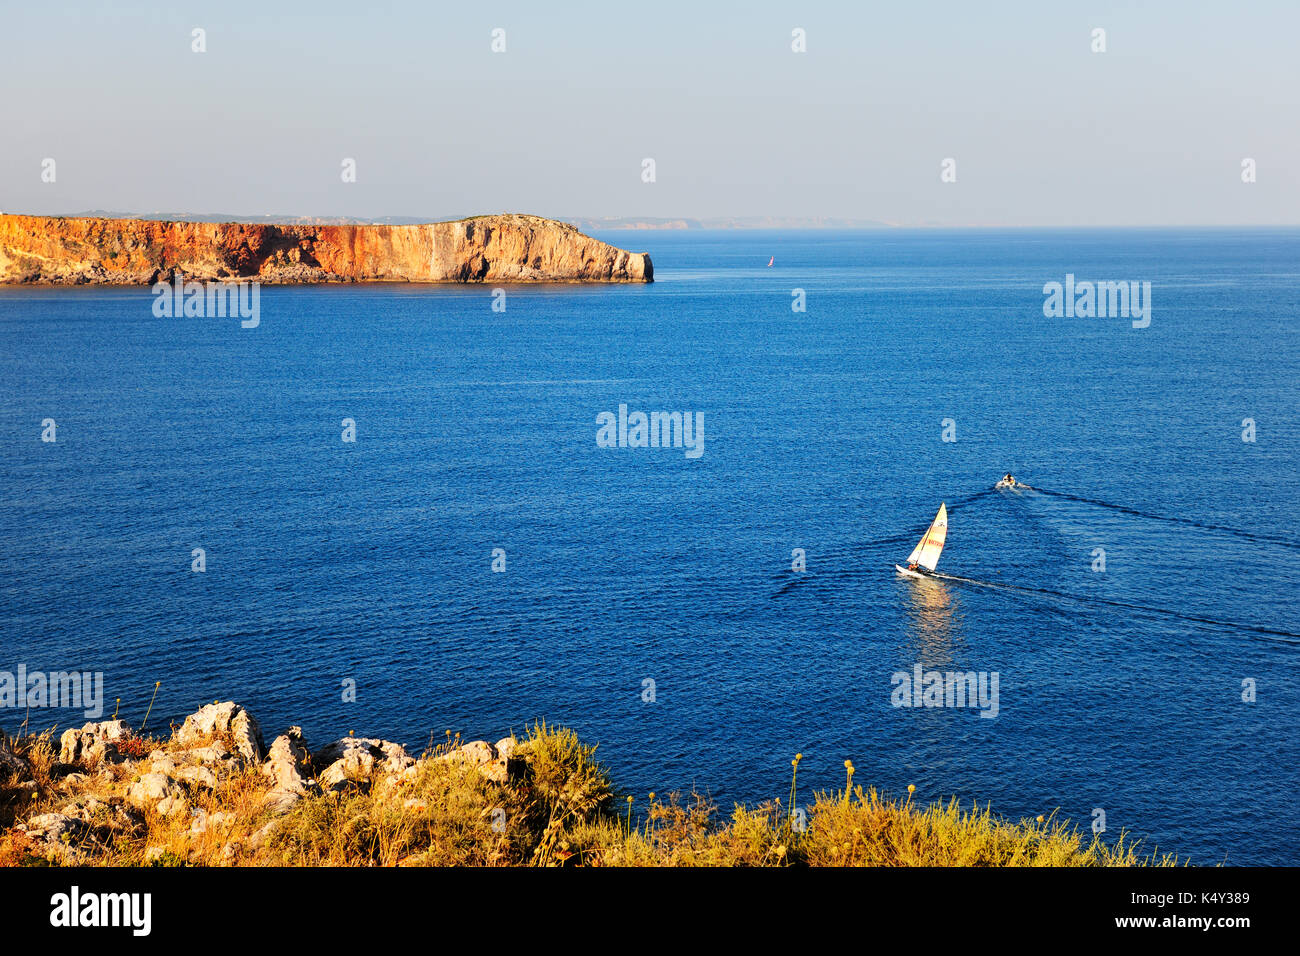 Sagres cape, where the great world discoveries of Portugal were planned by Infante Dom Henrique. Algarve, Portugal Stock Photo